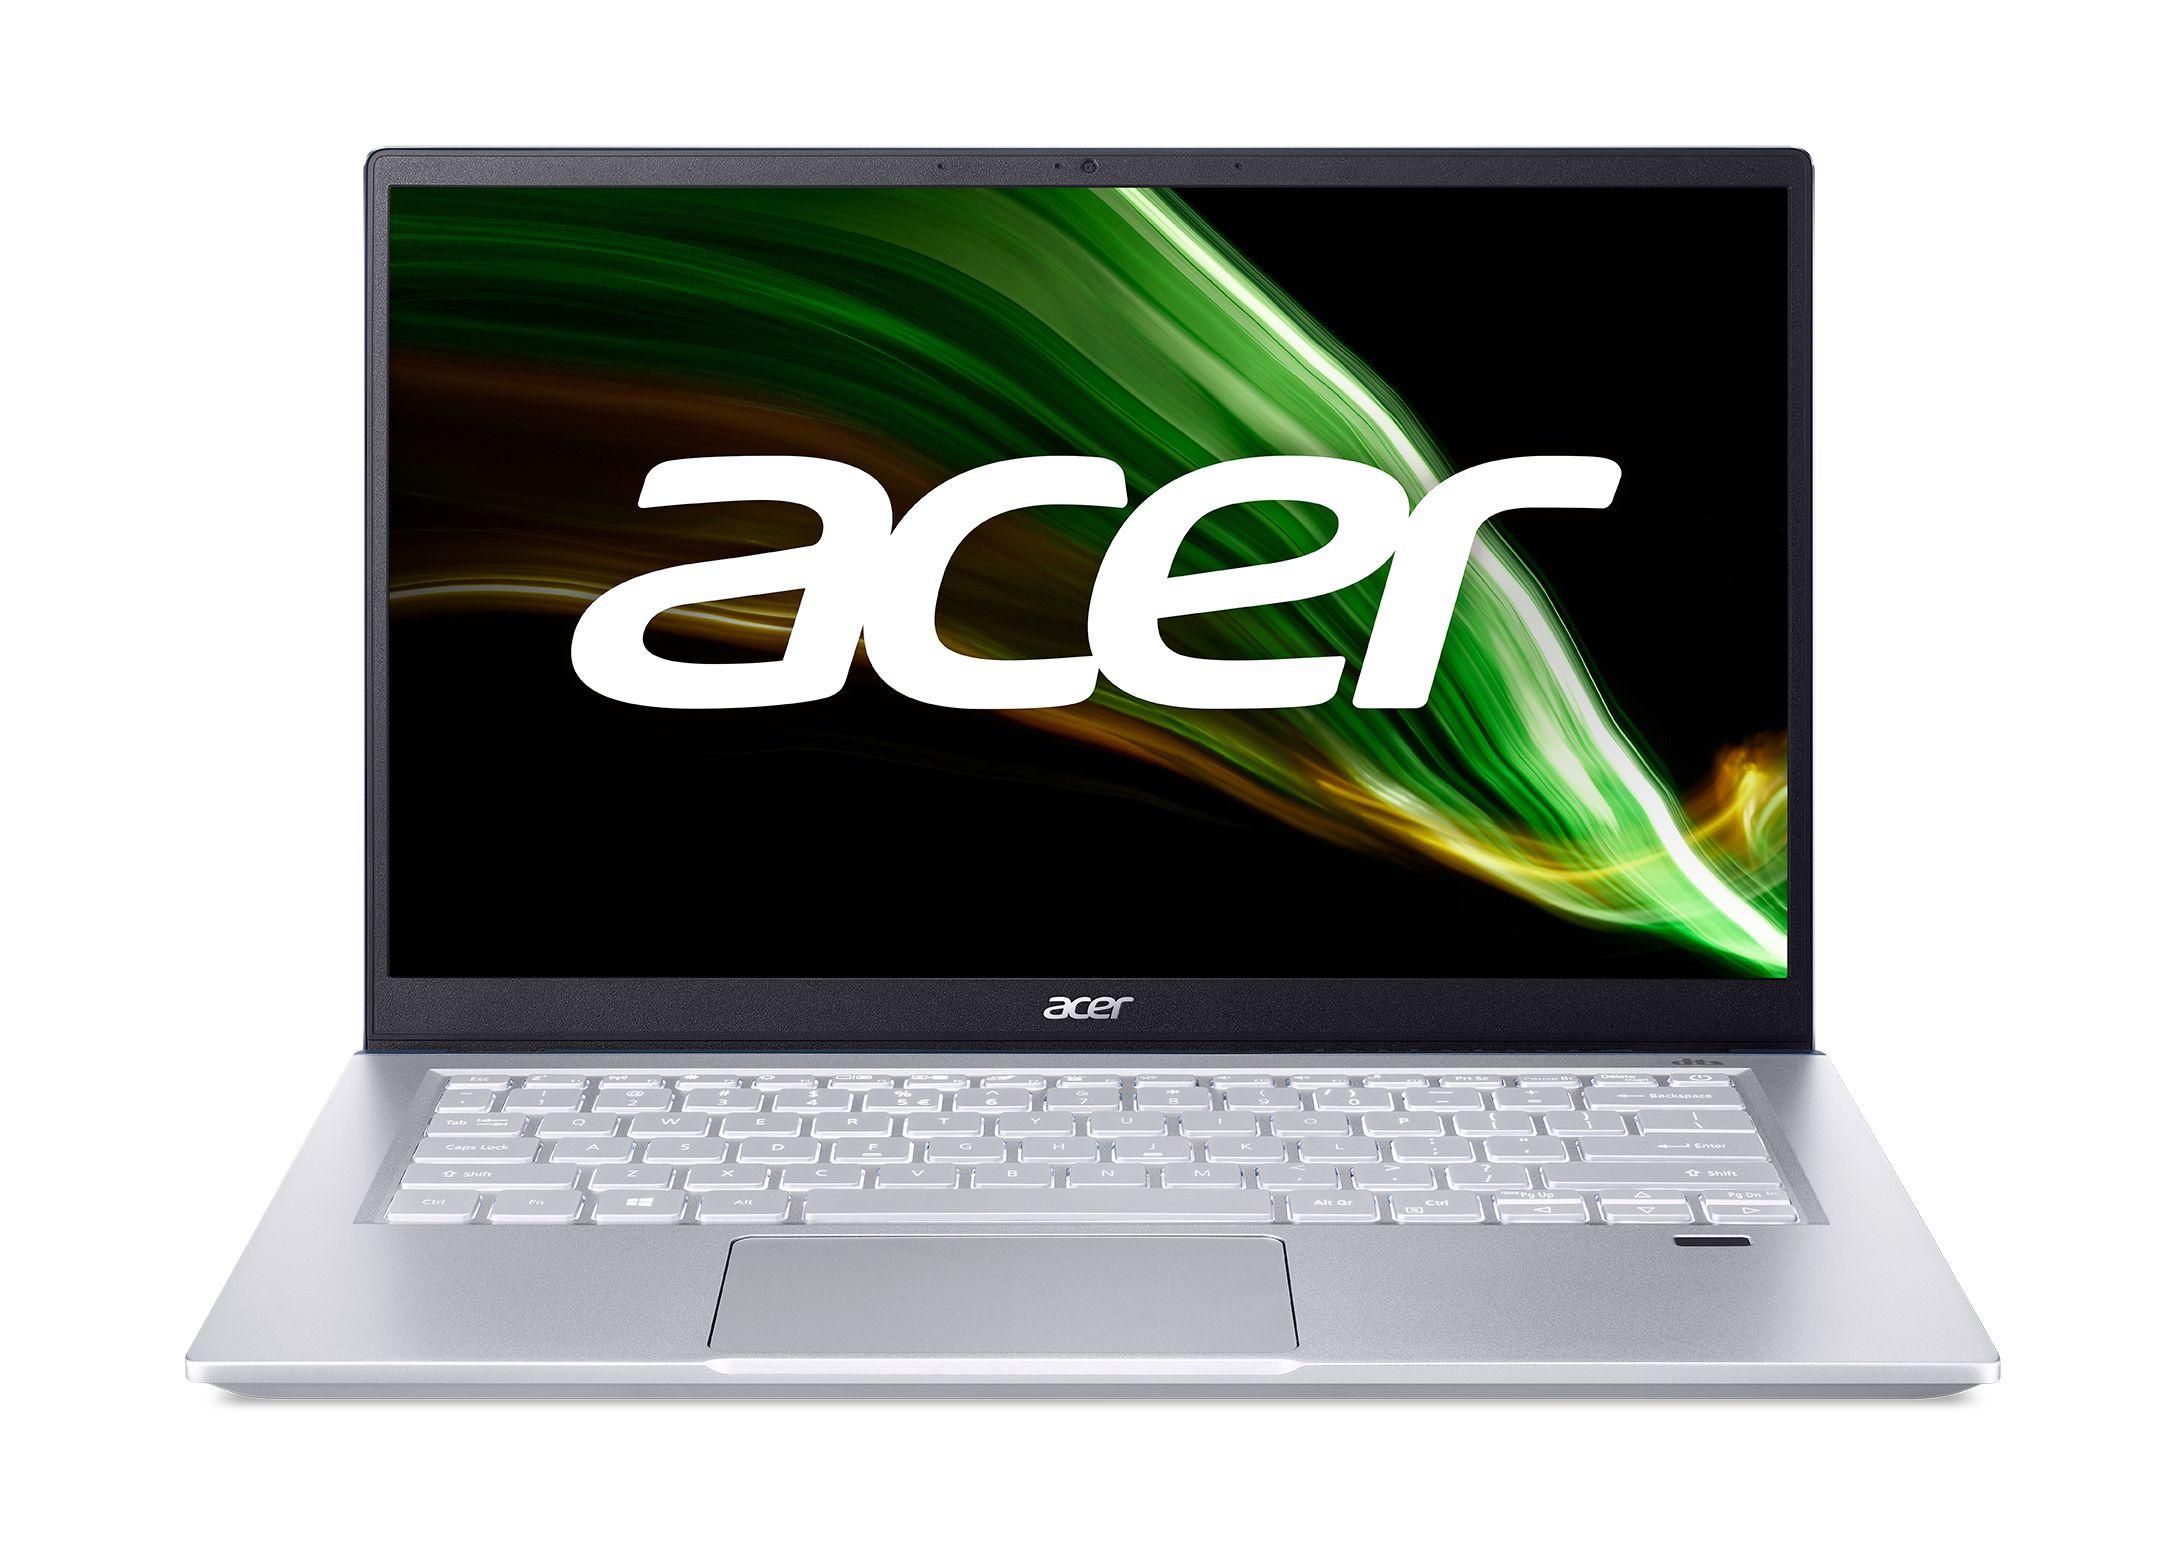 Acer i3 1115g4. Acer Swift x. Acer Swift 3 sf314-43 характеристики.